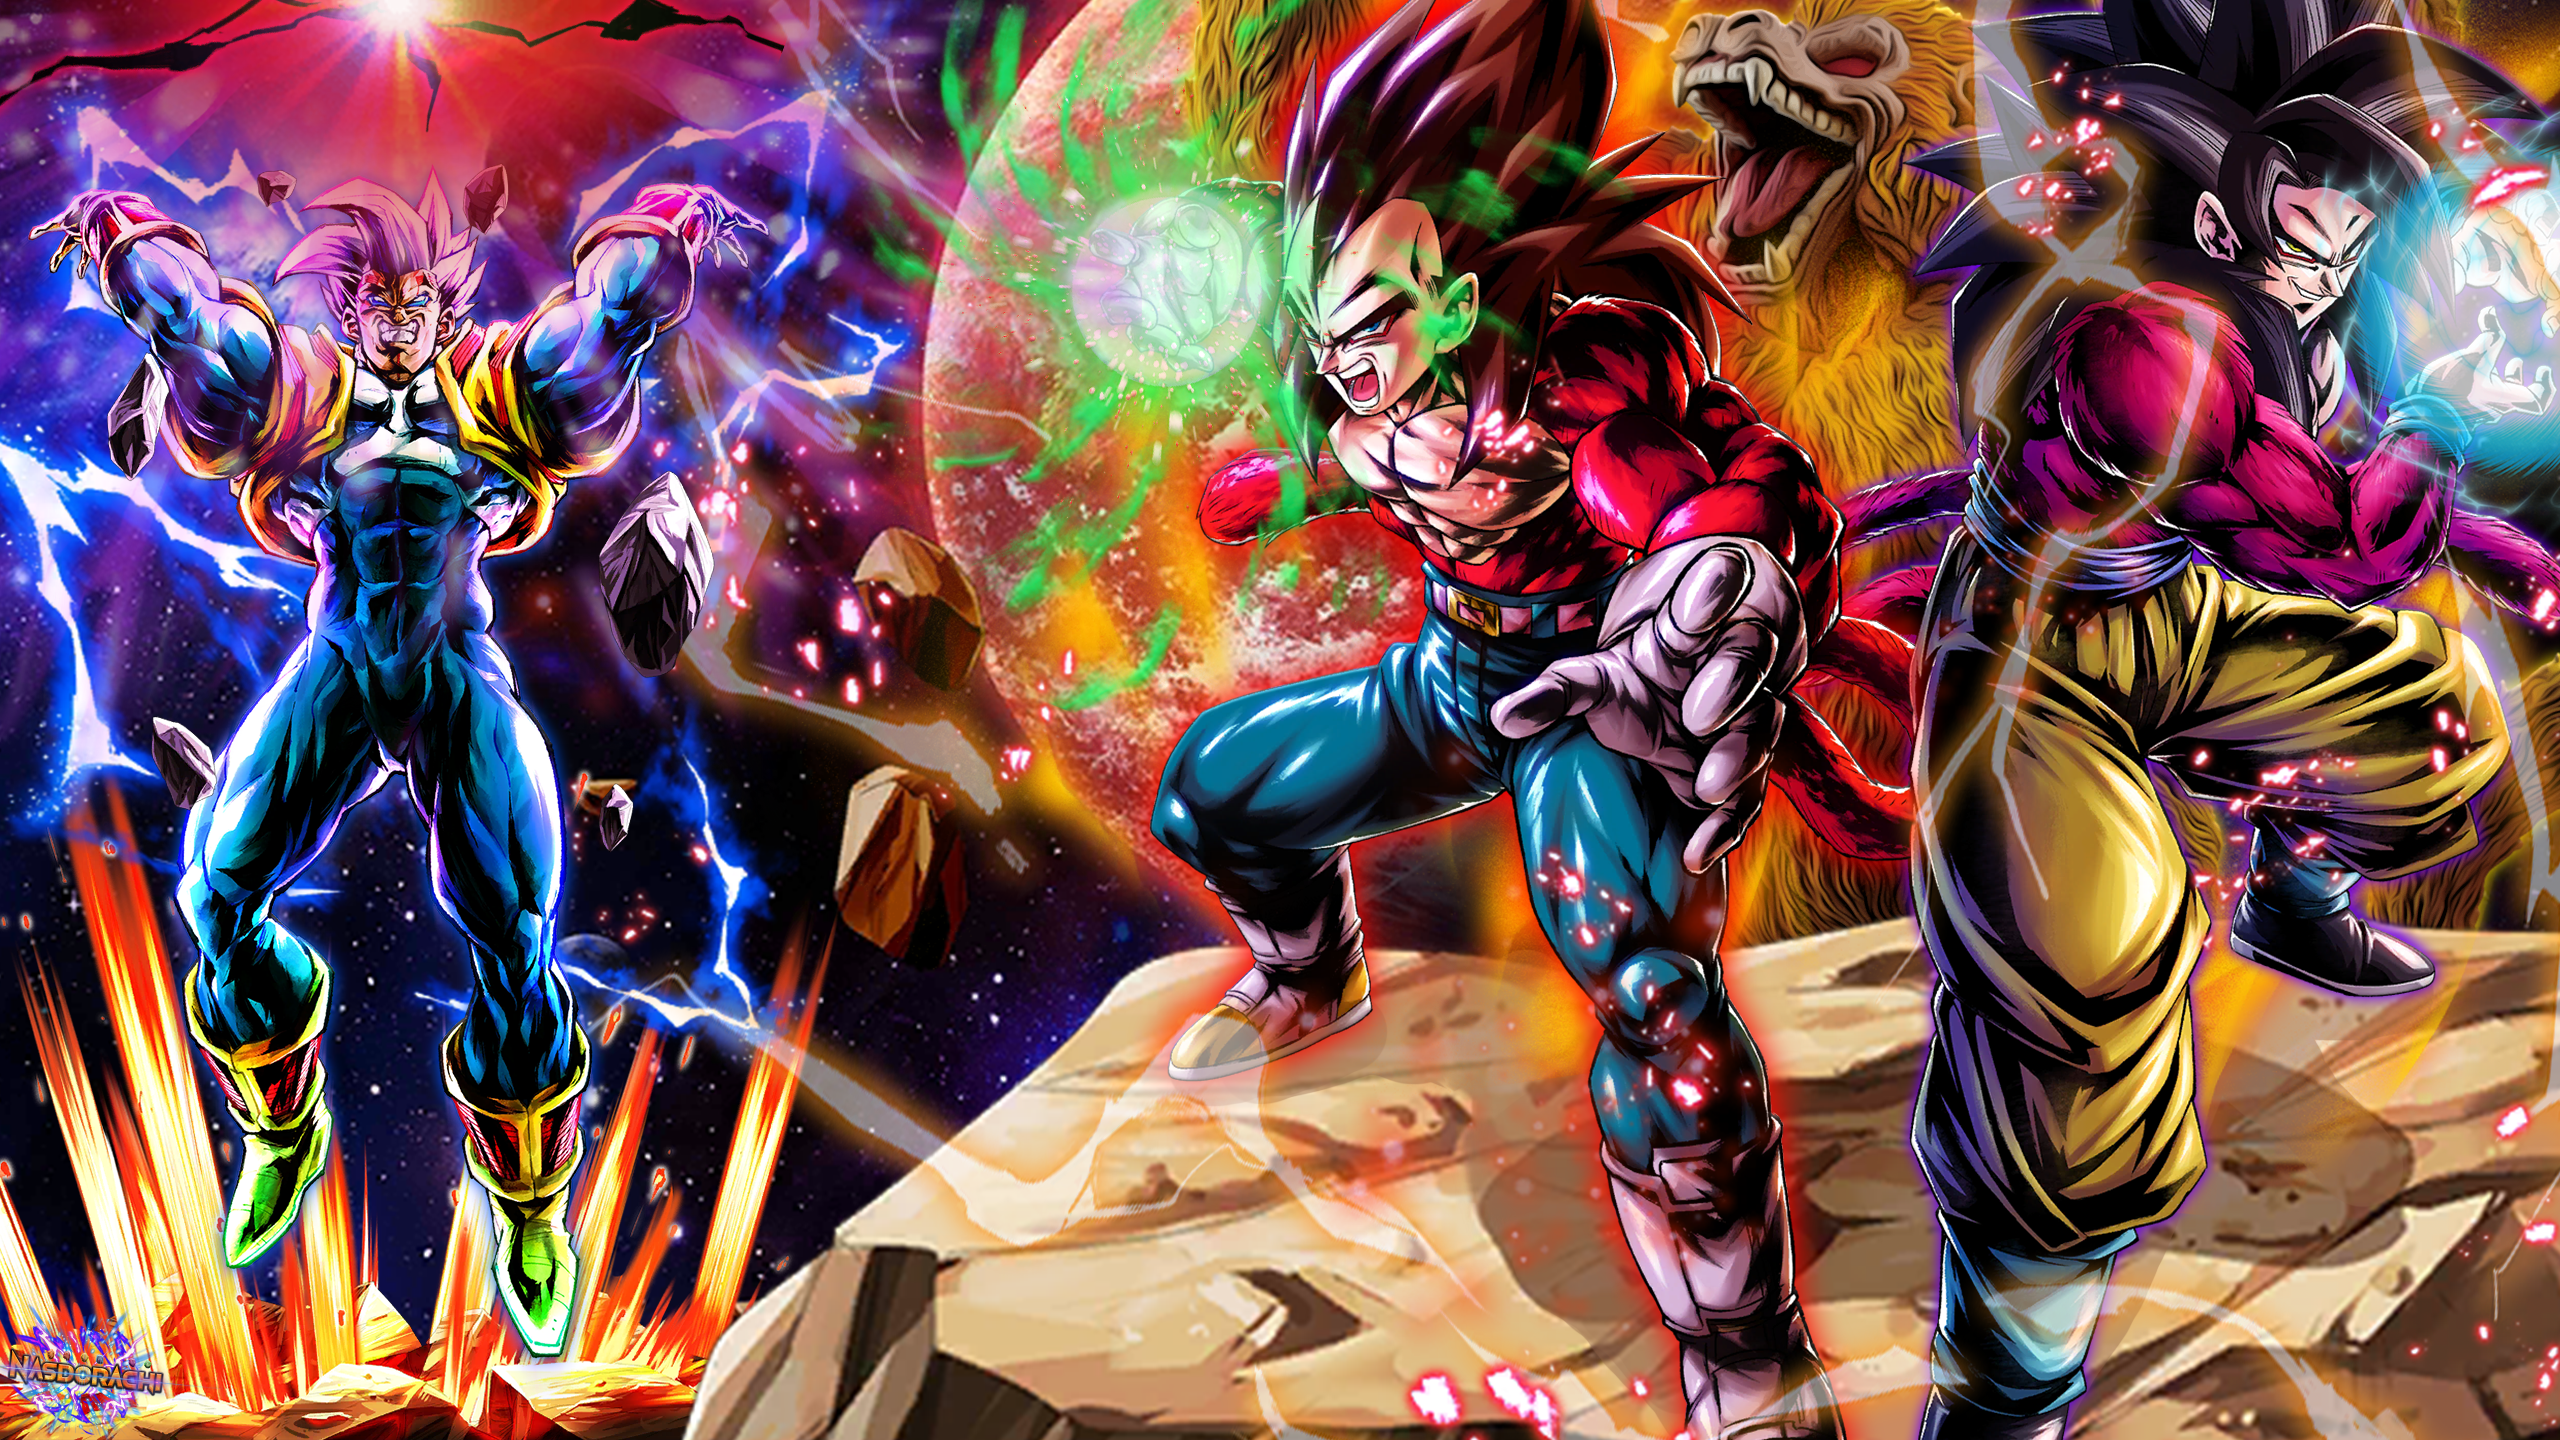 300ppi SSJ4 Goku SSJ4 Vegeta and Super baby 2 PC Wallpaper made from Legends assets from me to you for the Holidays!: DragonballLegends